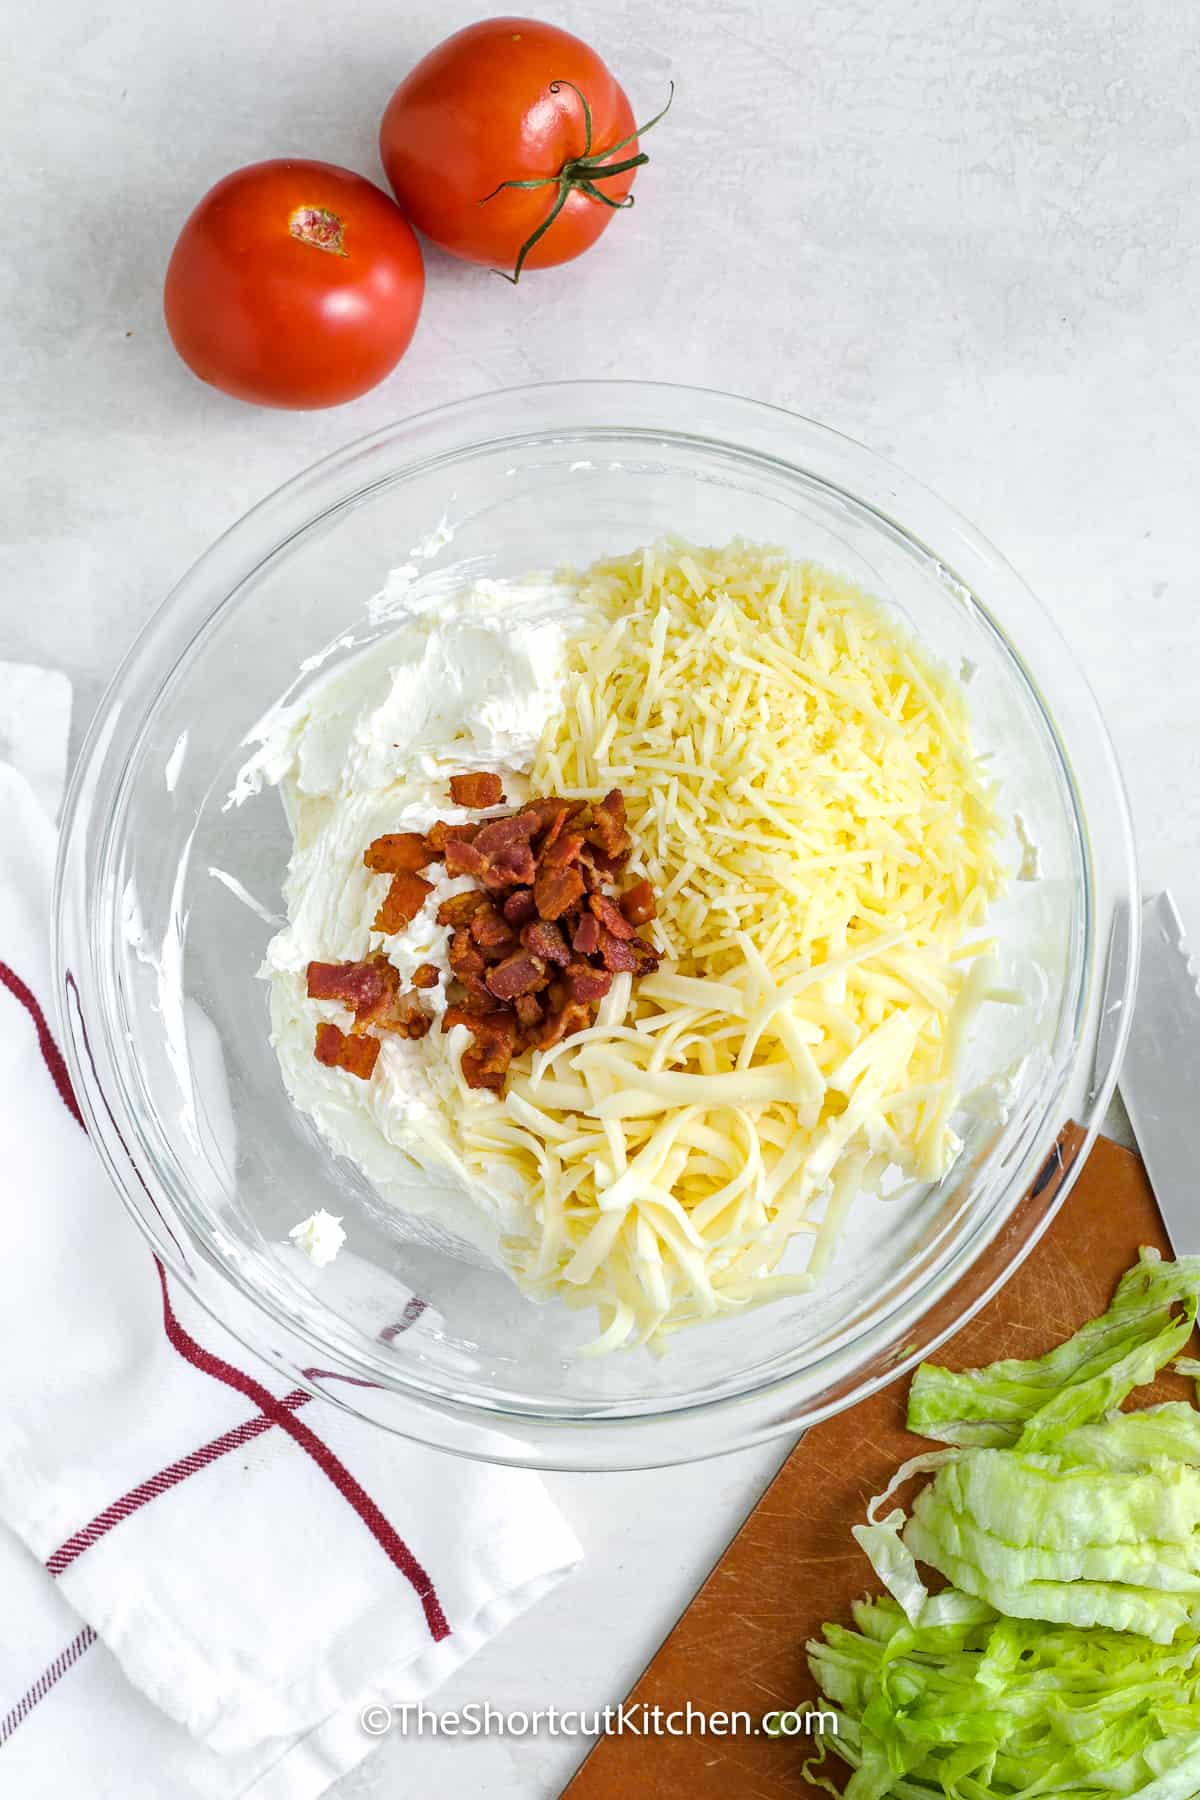 cheese added to other ingredients for creamy BLT dip